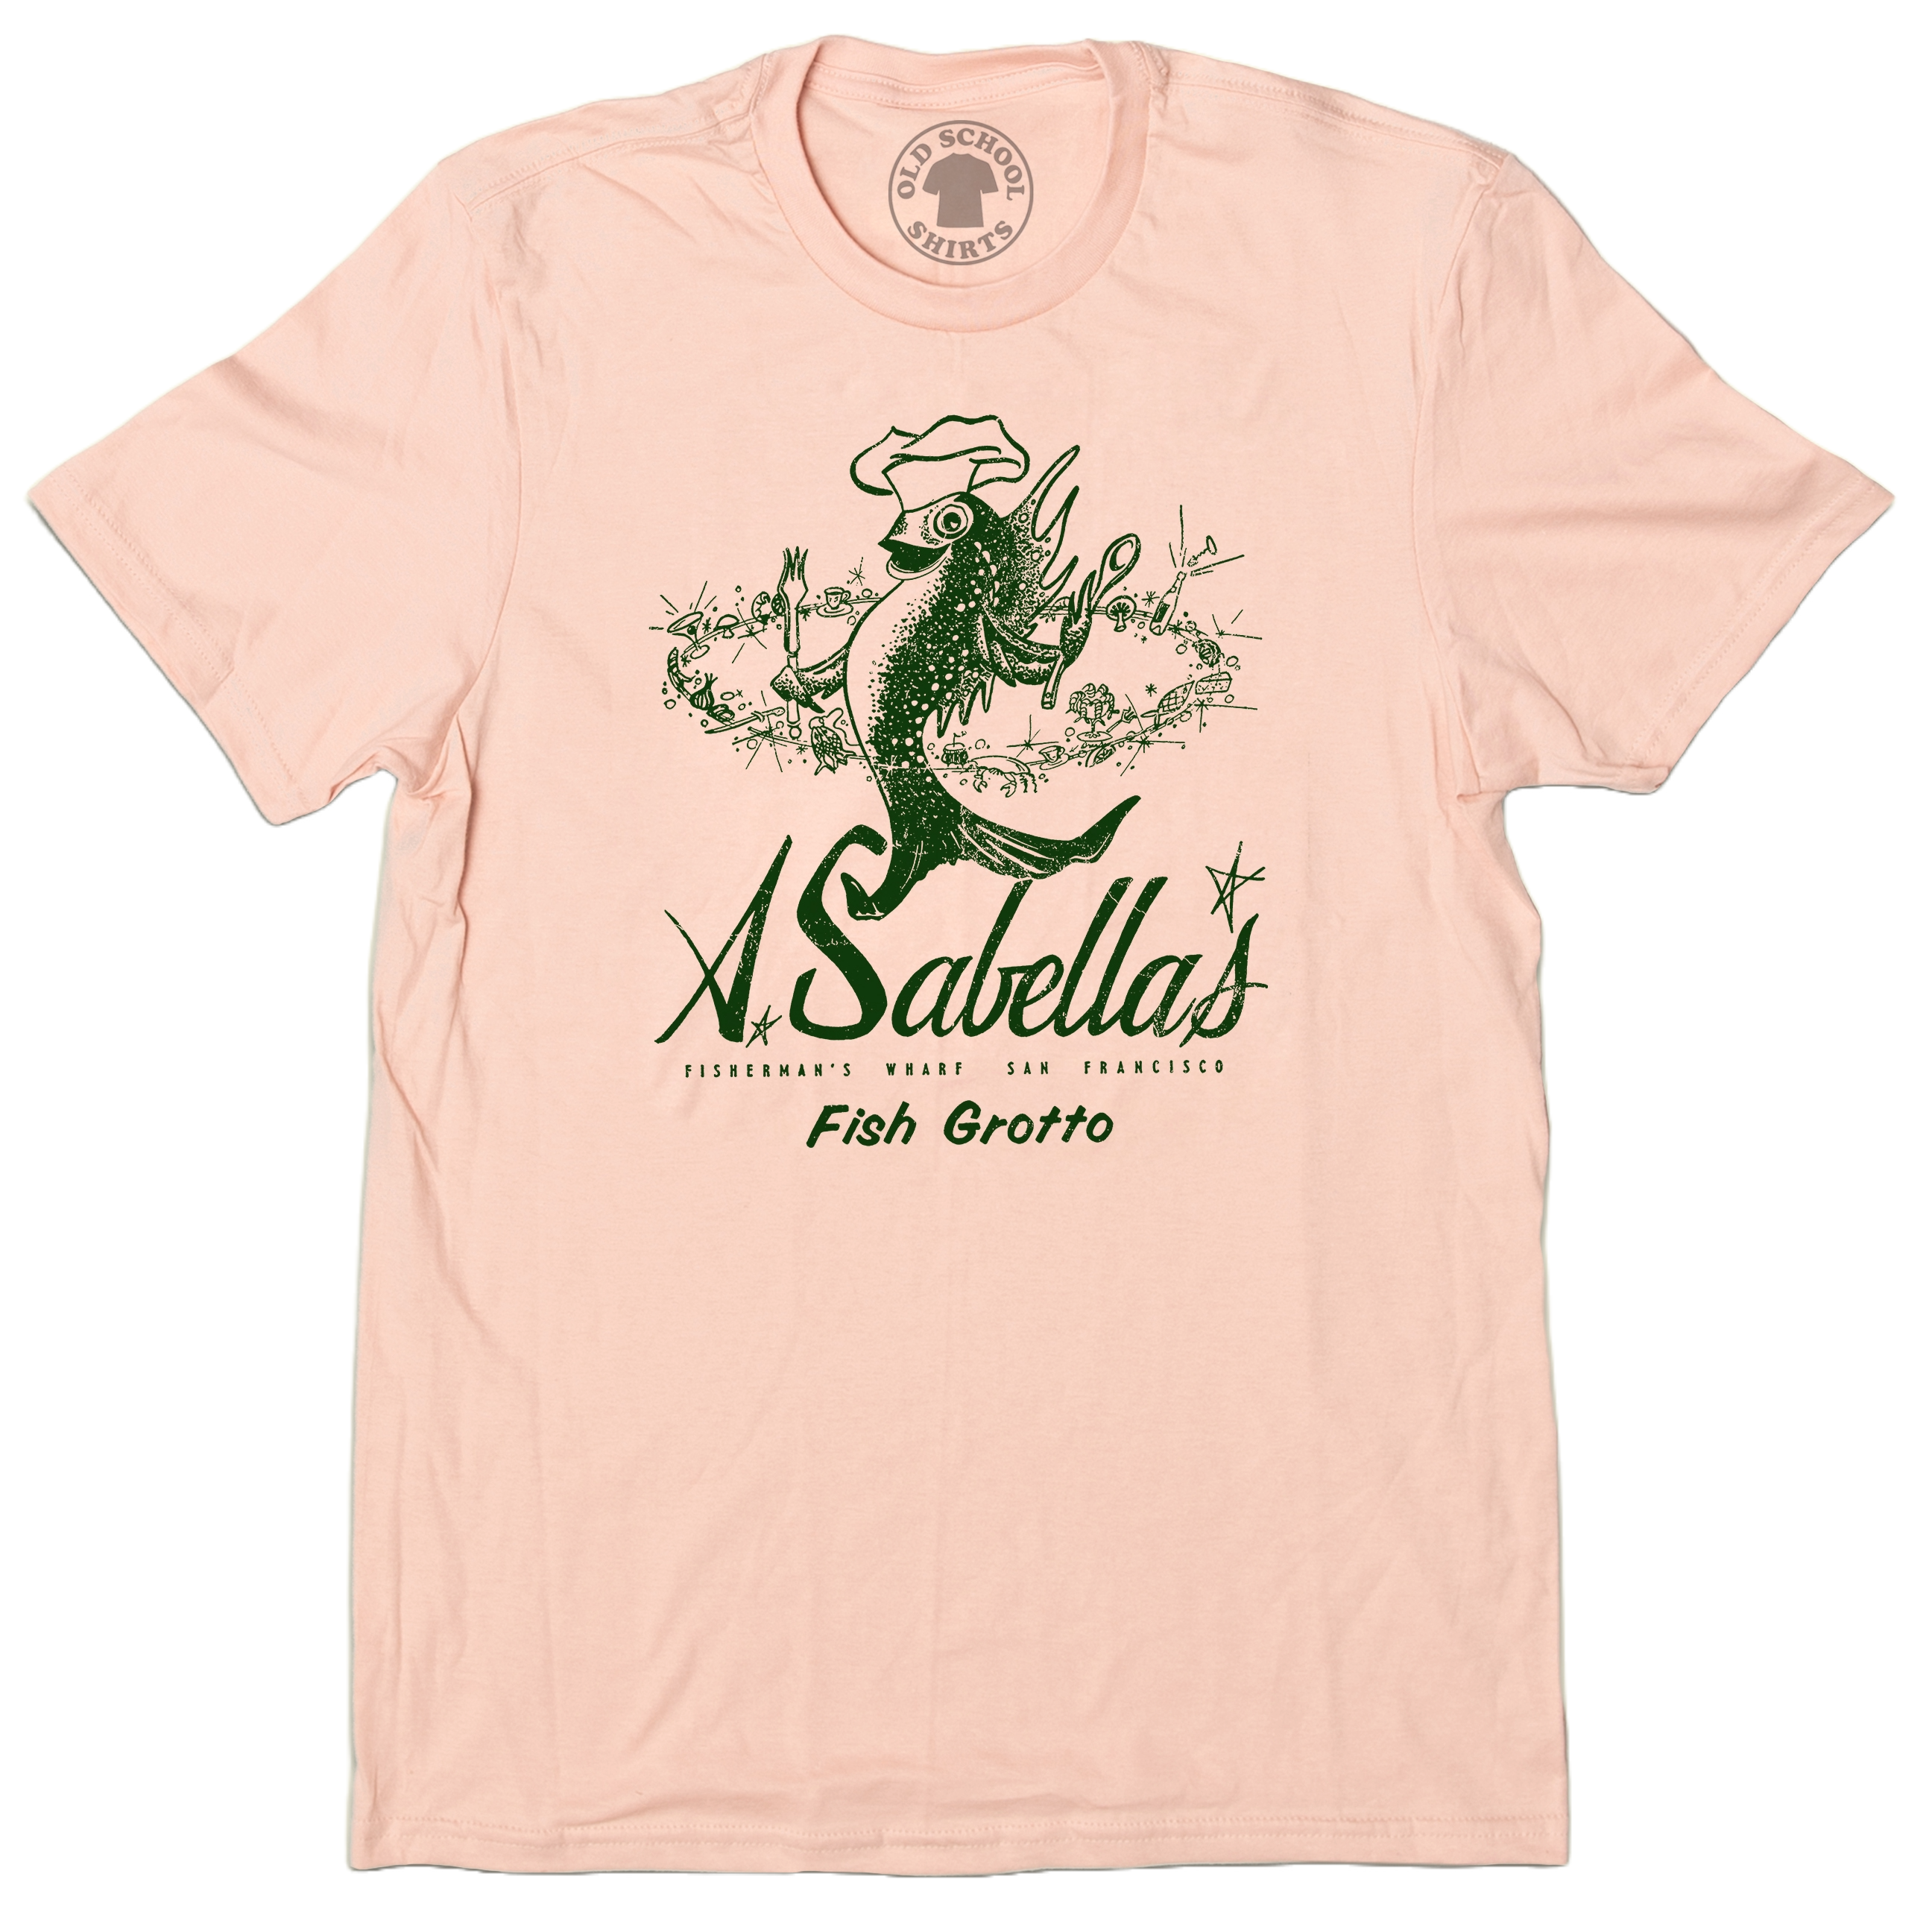 A. Sabella's Fish Grotto Unisex Tee